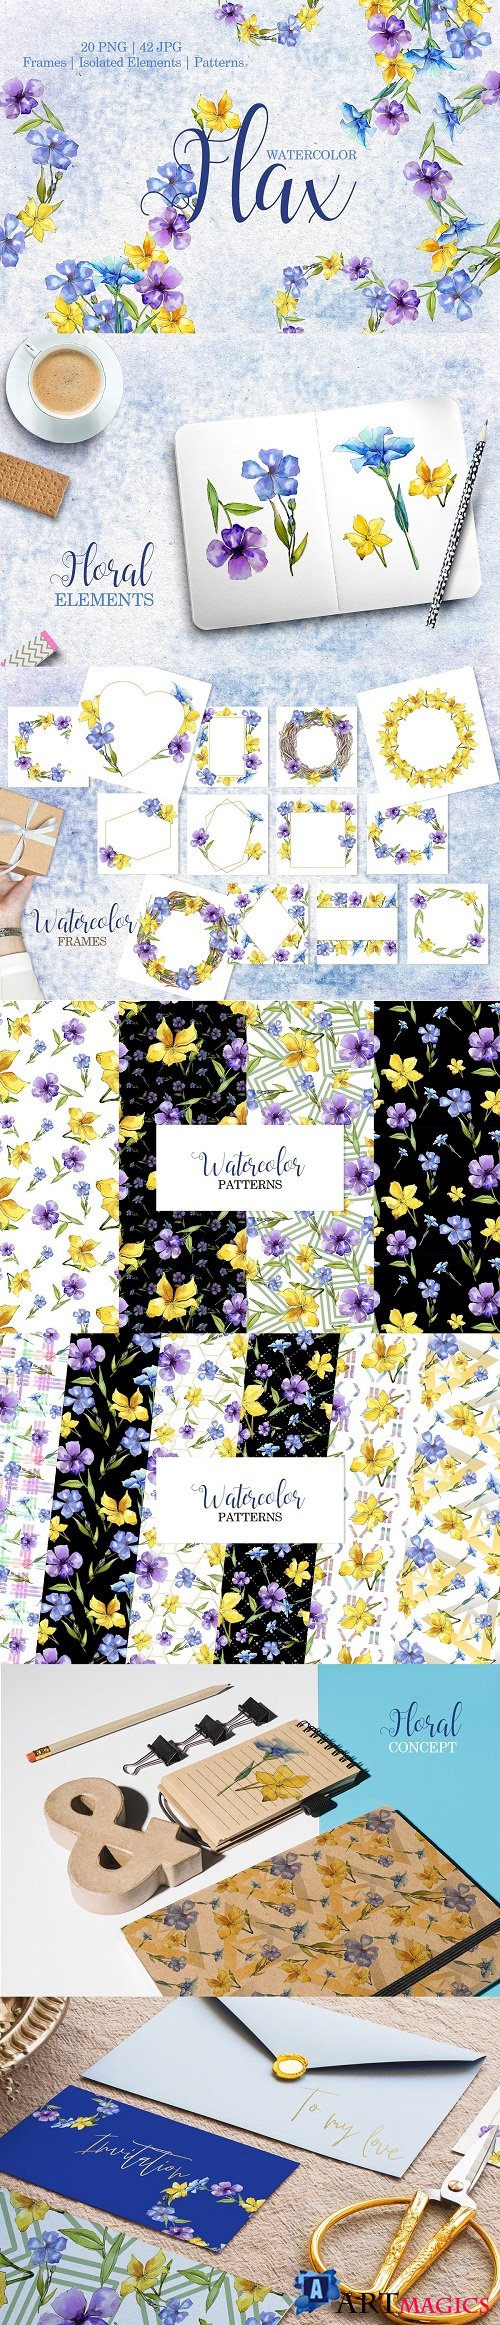 Flax Blue-yellow fowers Watercolor - 3467664